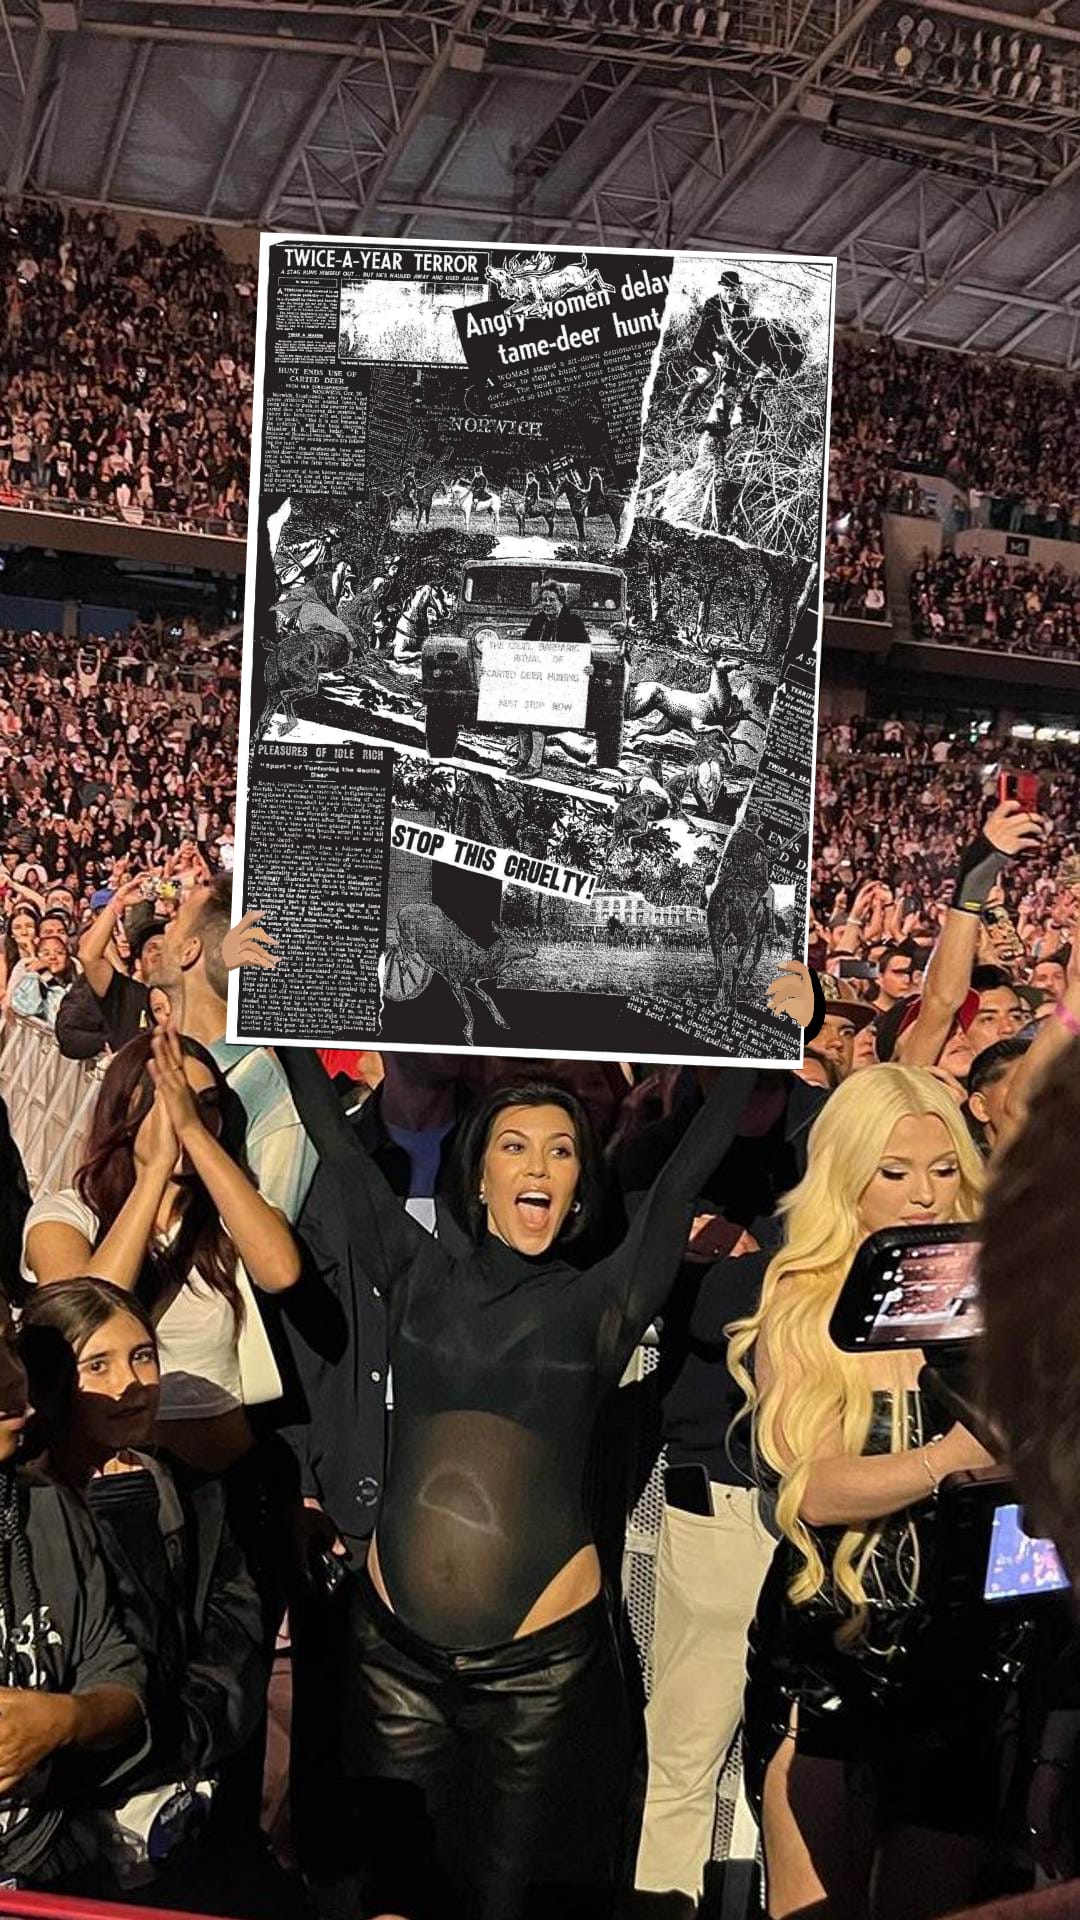 Kourtney Kardashian meme where she holds the collage made to accompany the Norwich Staghounds article